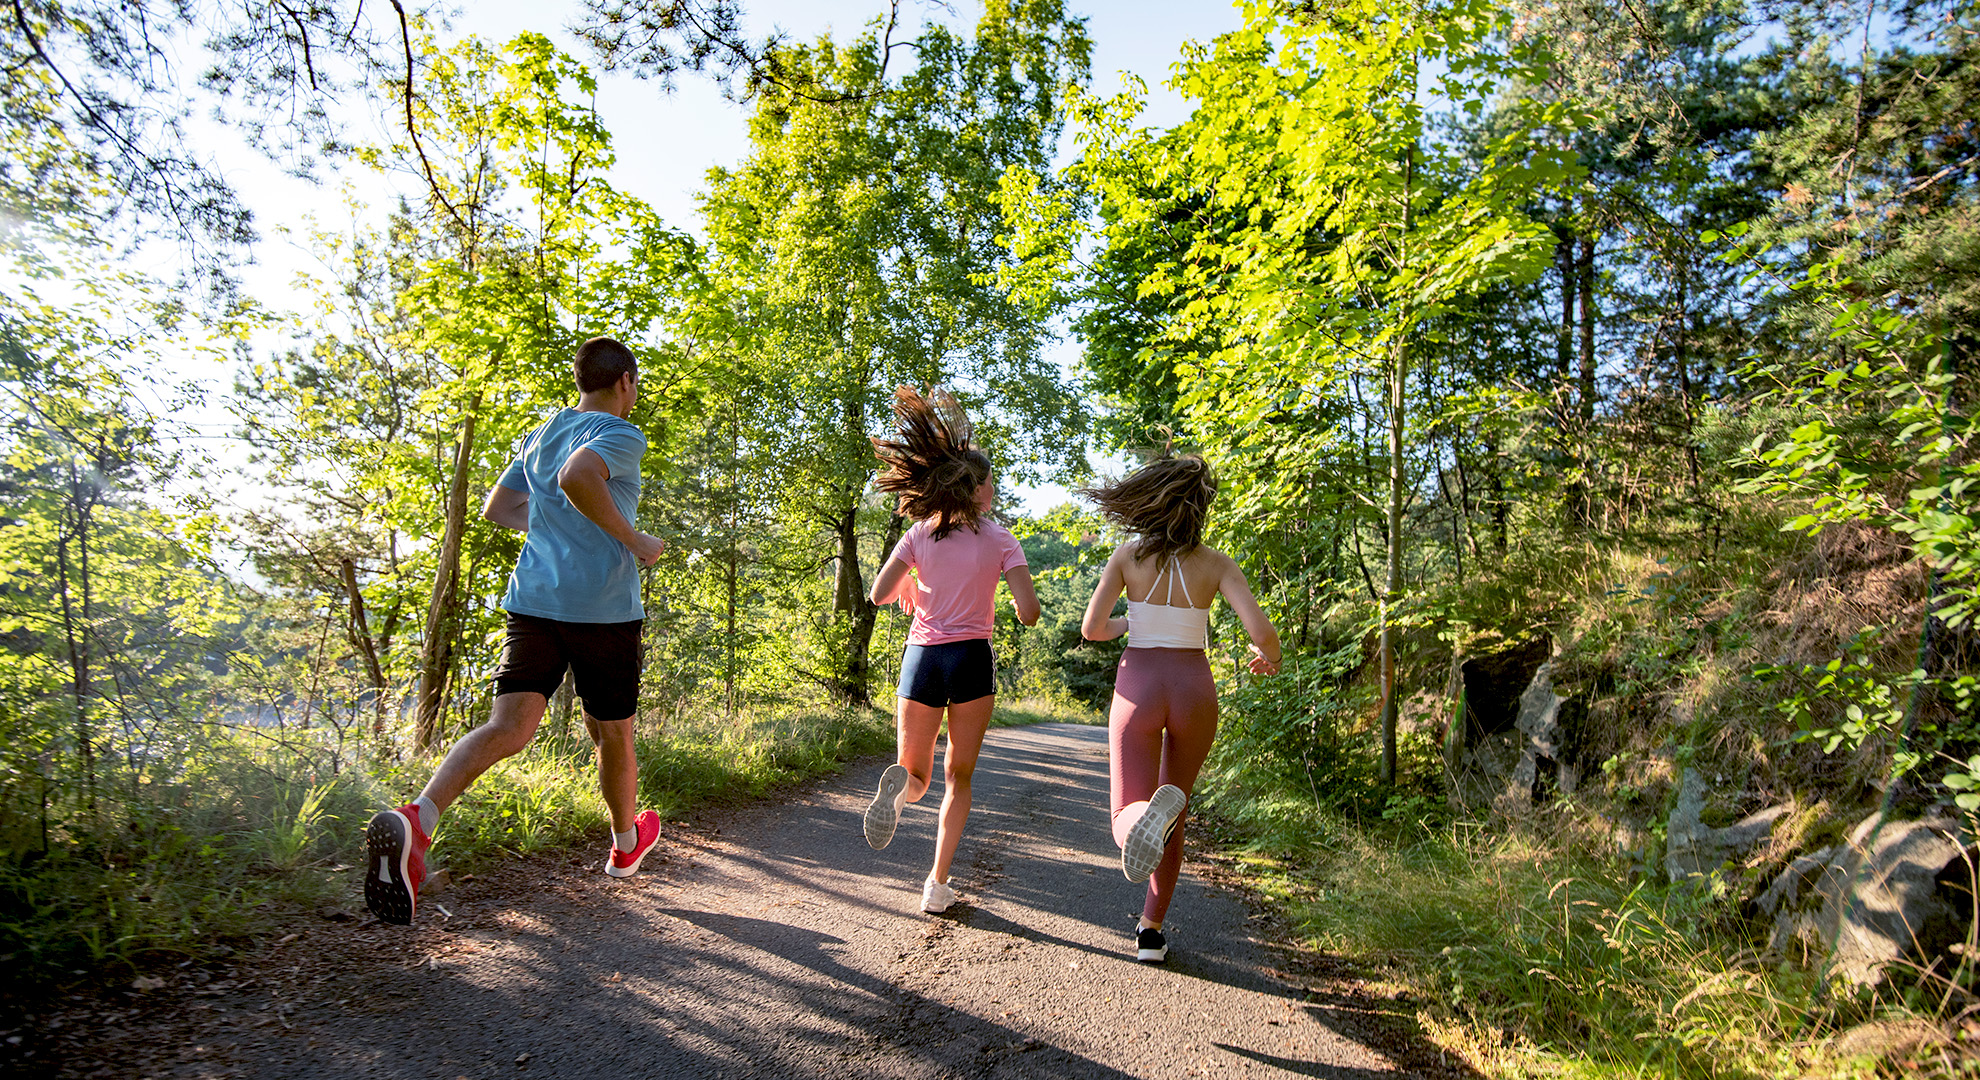 A small group of people run through a forest